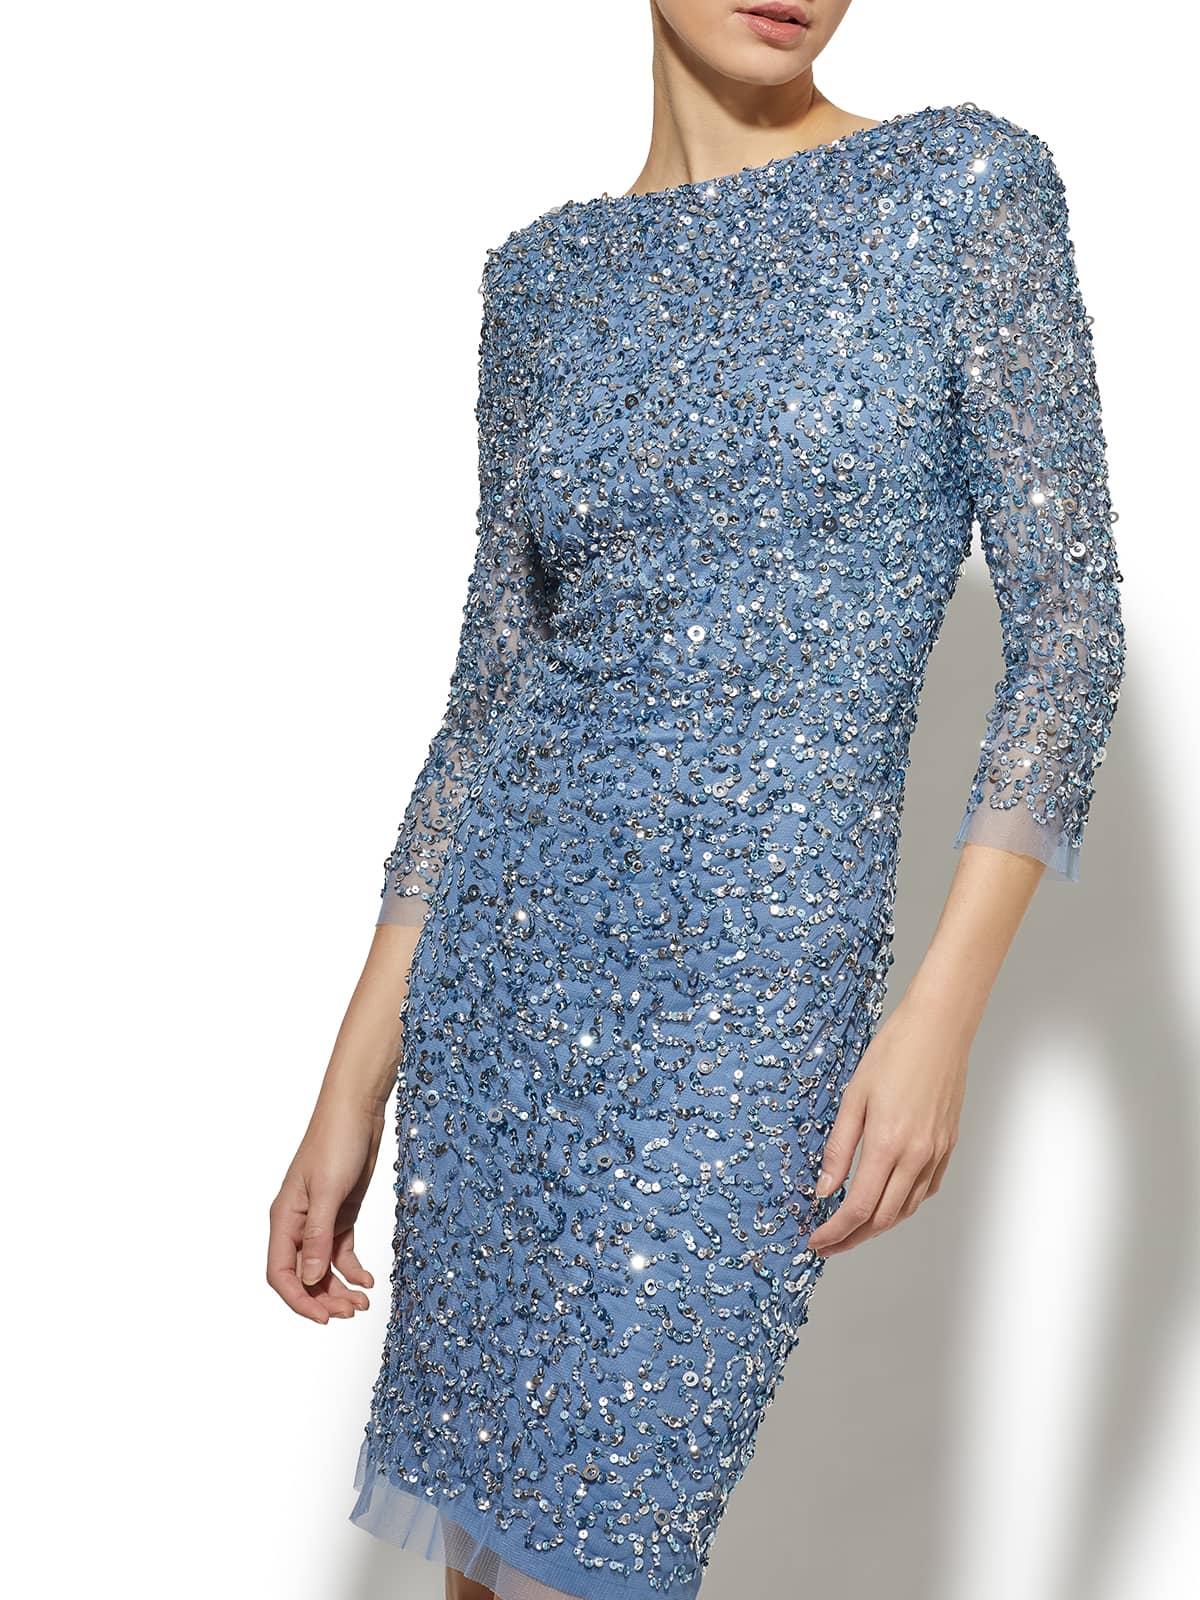 January Blue Hand Beaded Dress by Montique